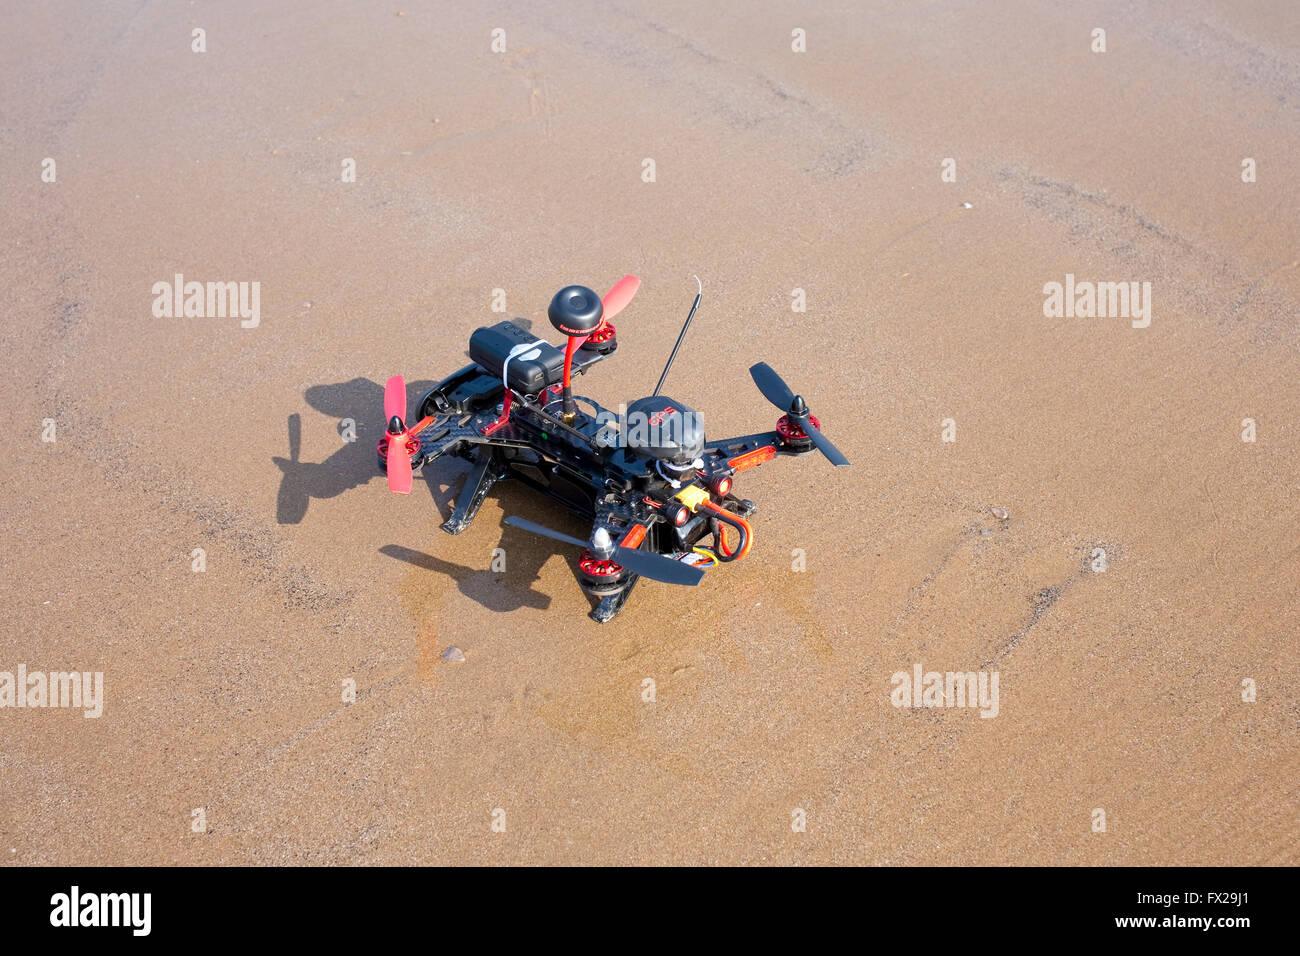 radio controlled drone being made ready to fly on an empty beach Stock Photo